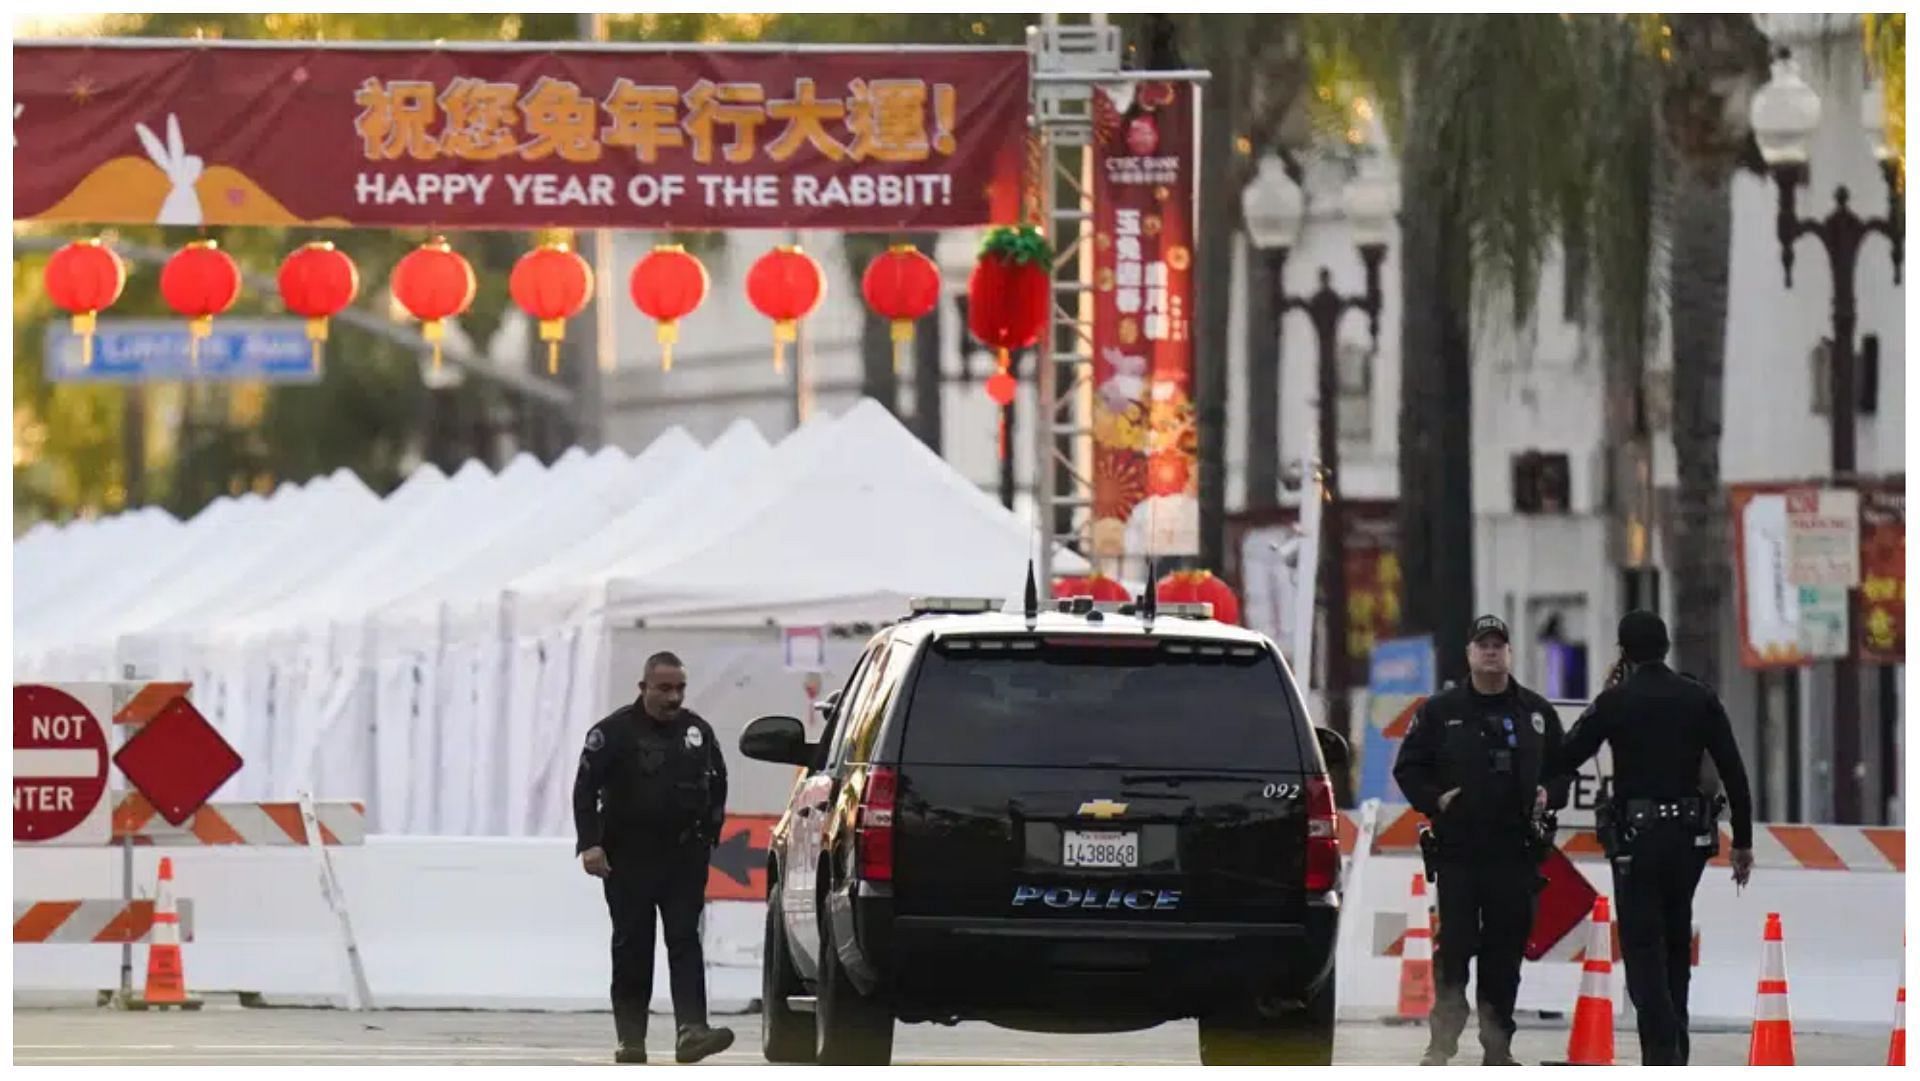 The suspect met his wife at the location where the shooting took place (image via Jae C. Hong/ The Associated Press)